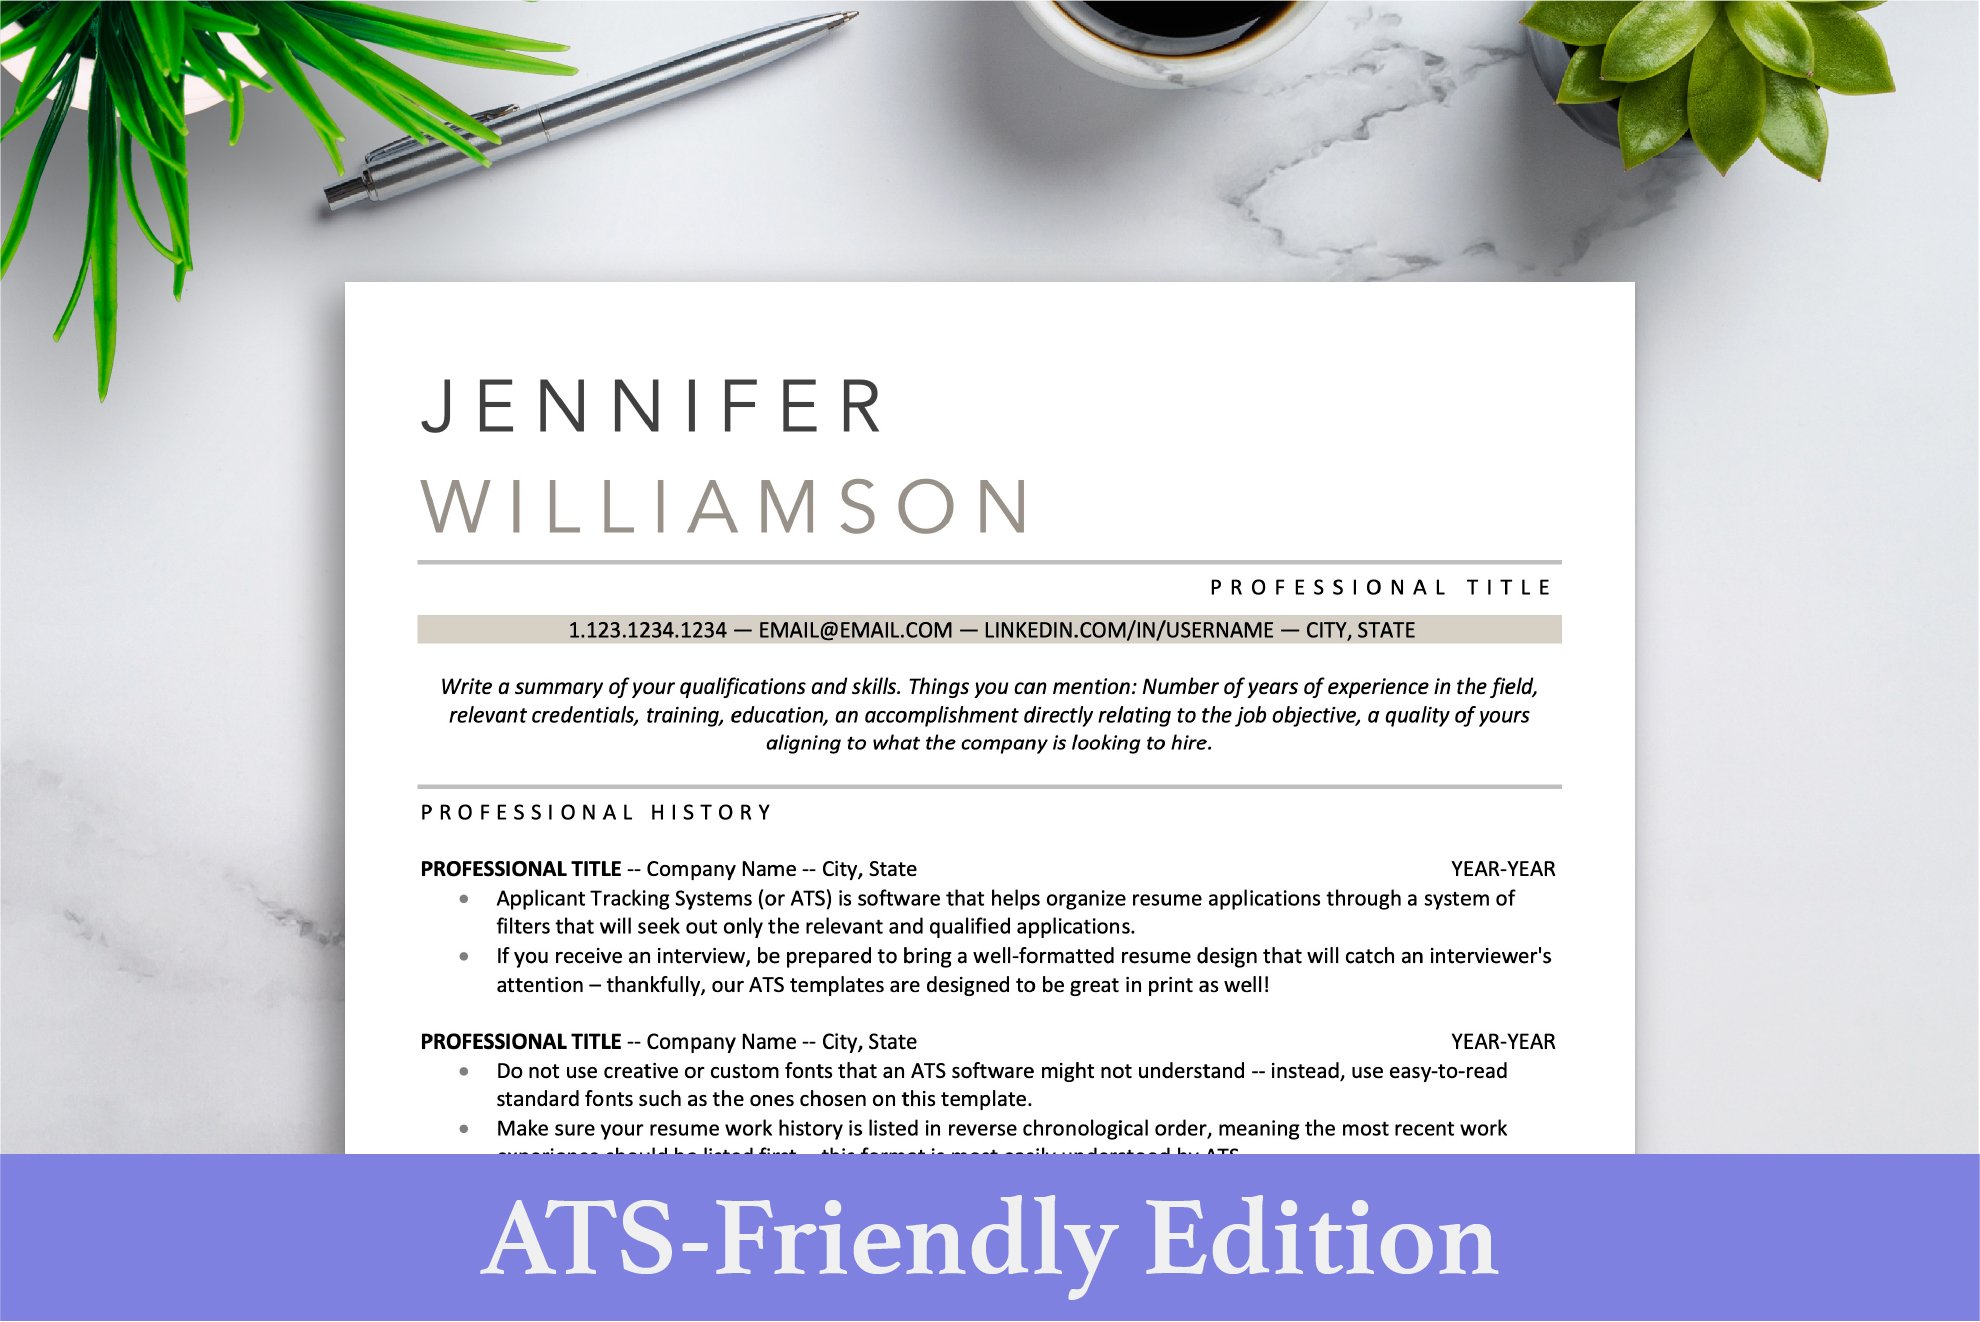 ATS Friendly Resume CV Template cover image.